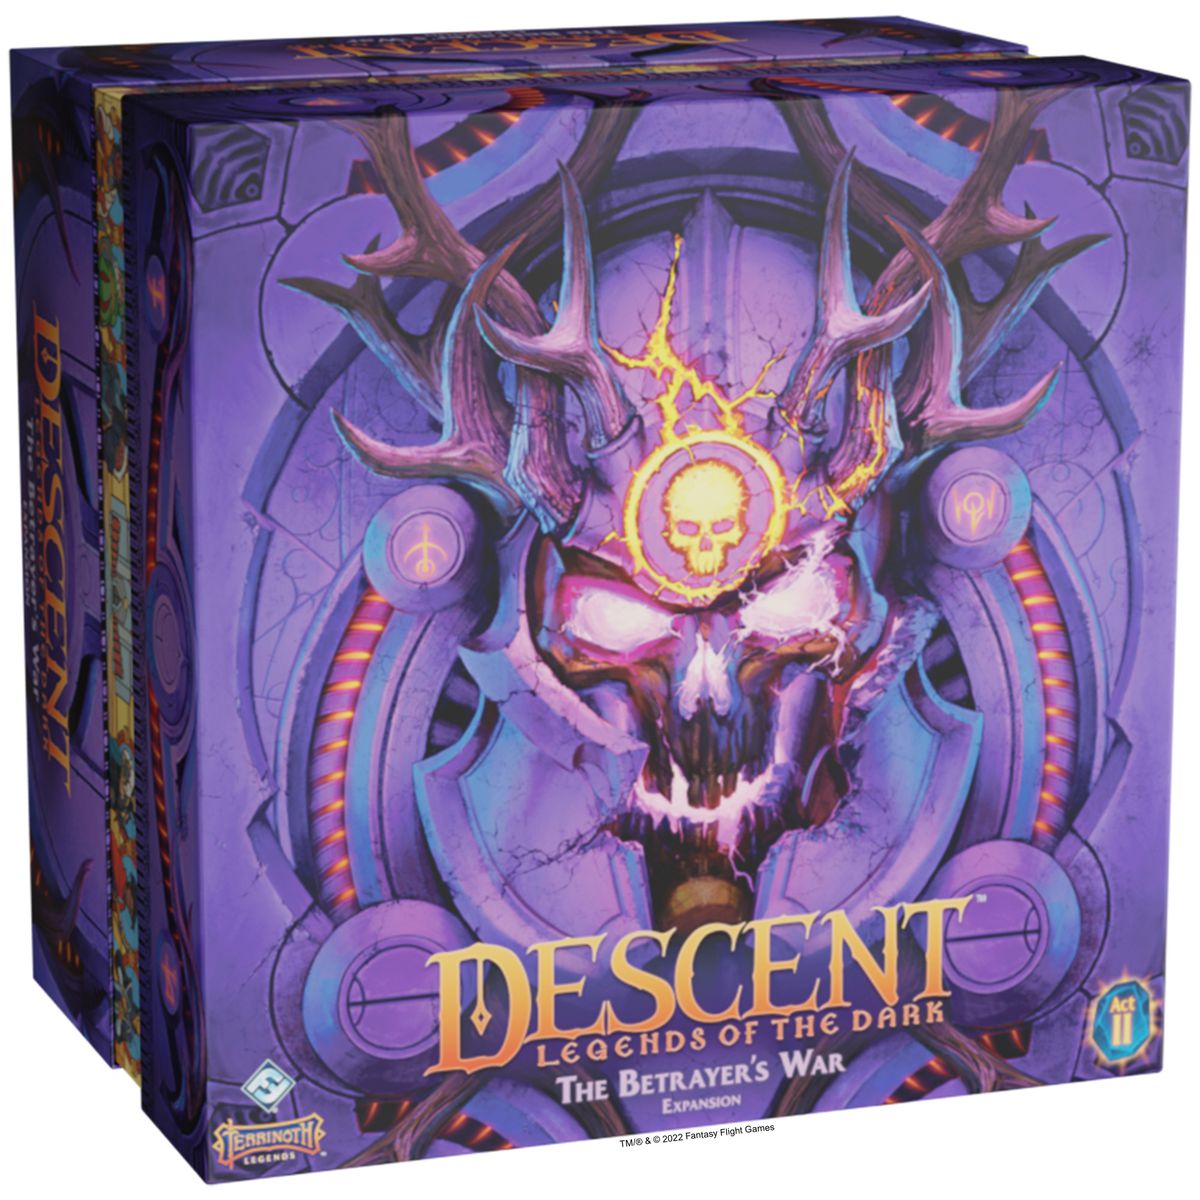 A render of the purple box for Descent Act 2: The Betrayer’s War, an expansion for Descent: Legends of the Dark.